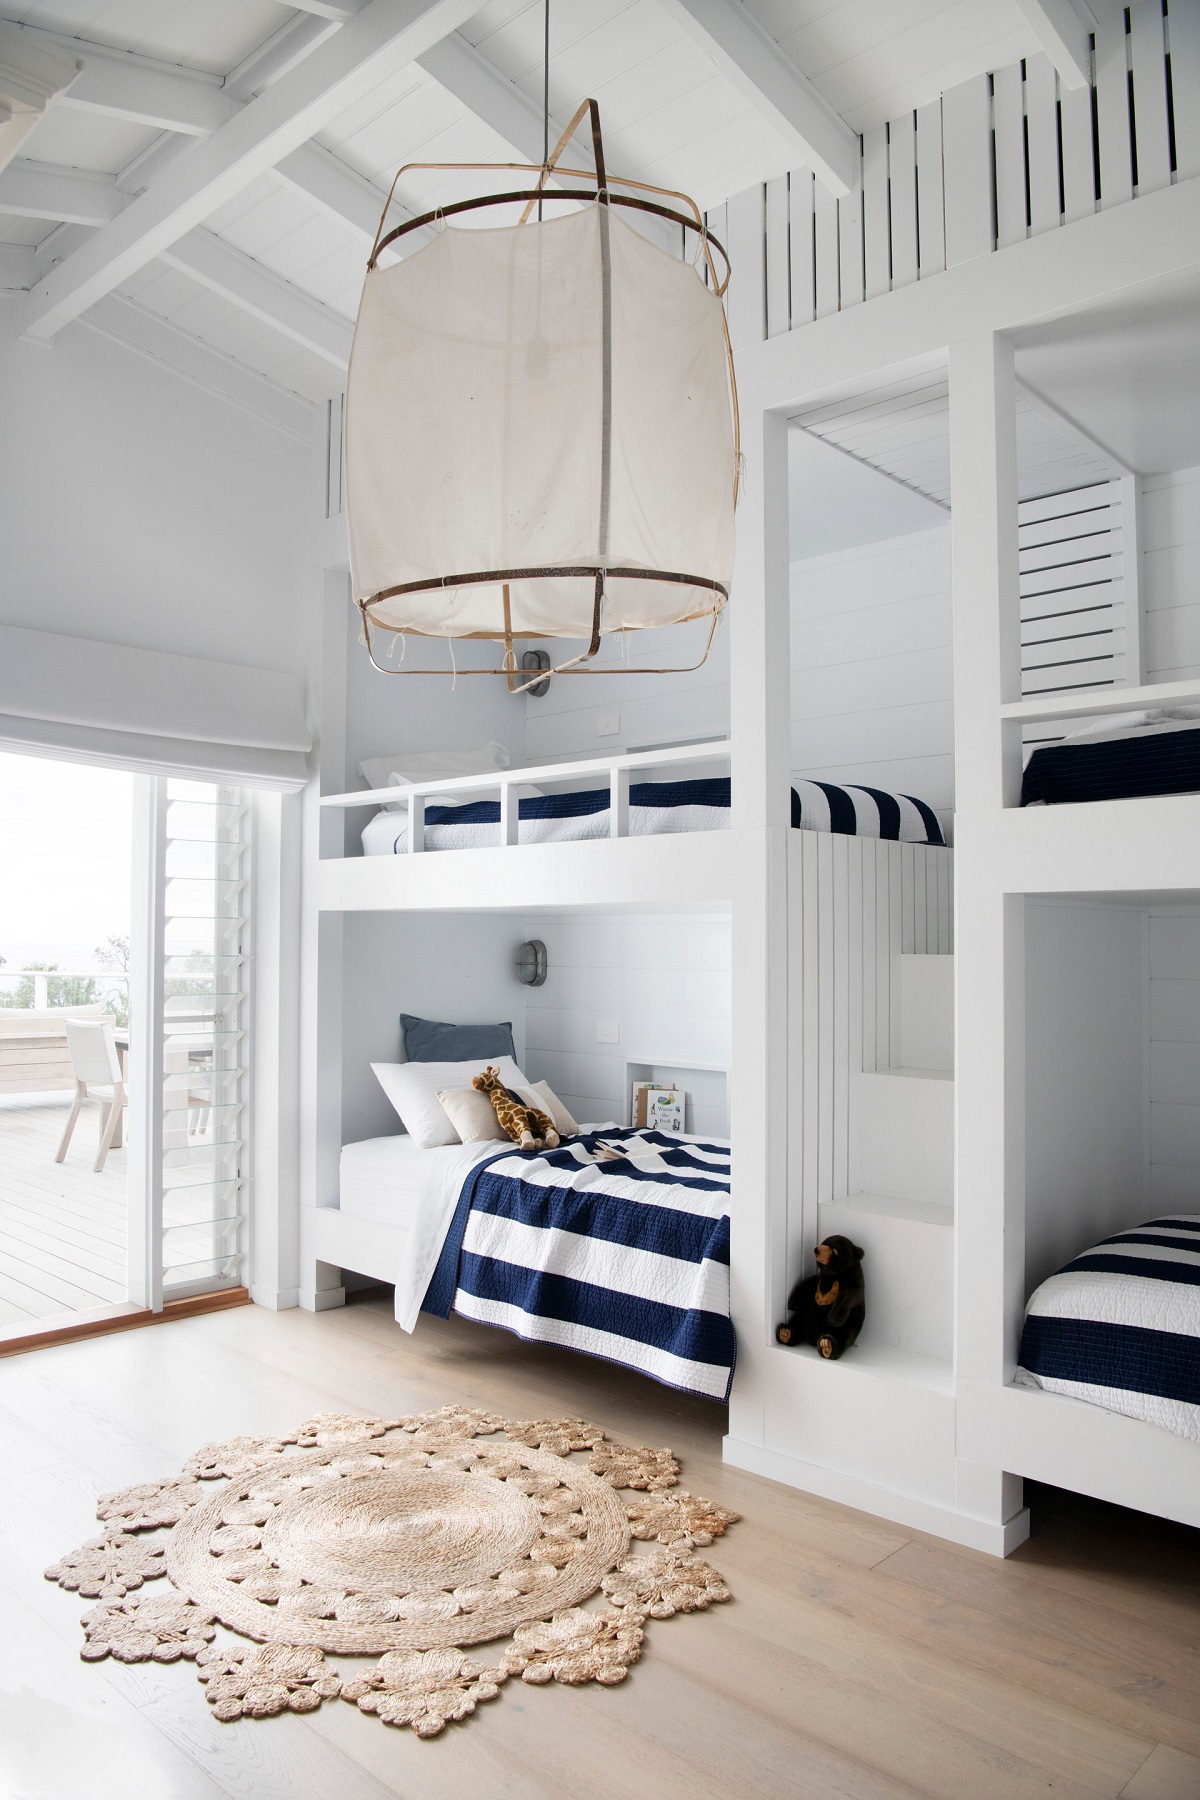 The nautical-style kids' bedroom brings a ship's cabin to mind and promises hours of salty fun spent on holidays in this fresh, airy south coast beach house. Each bunk has its reading light and a nook recessed into the wall to store holiday books and treasures.